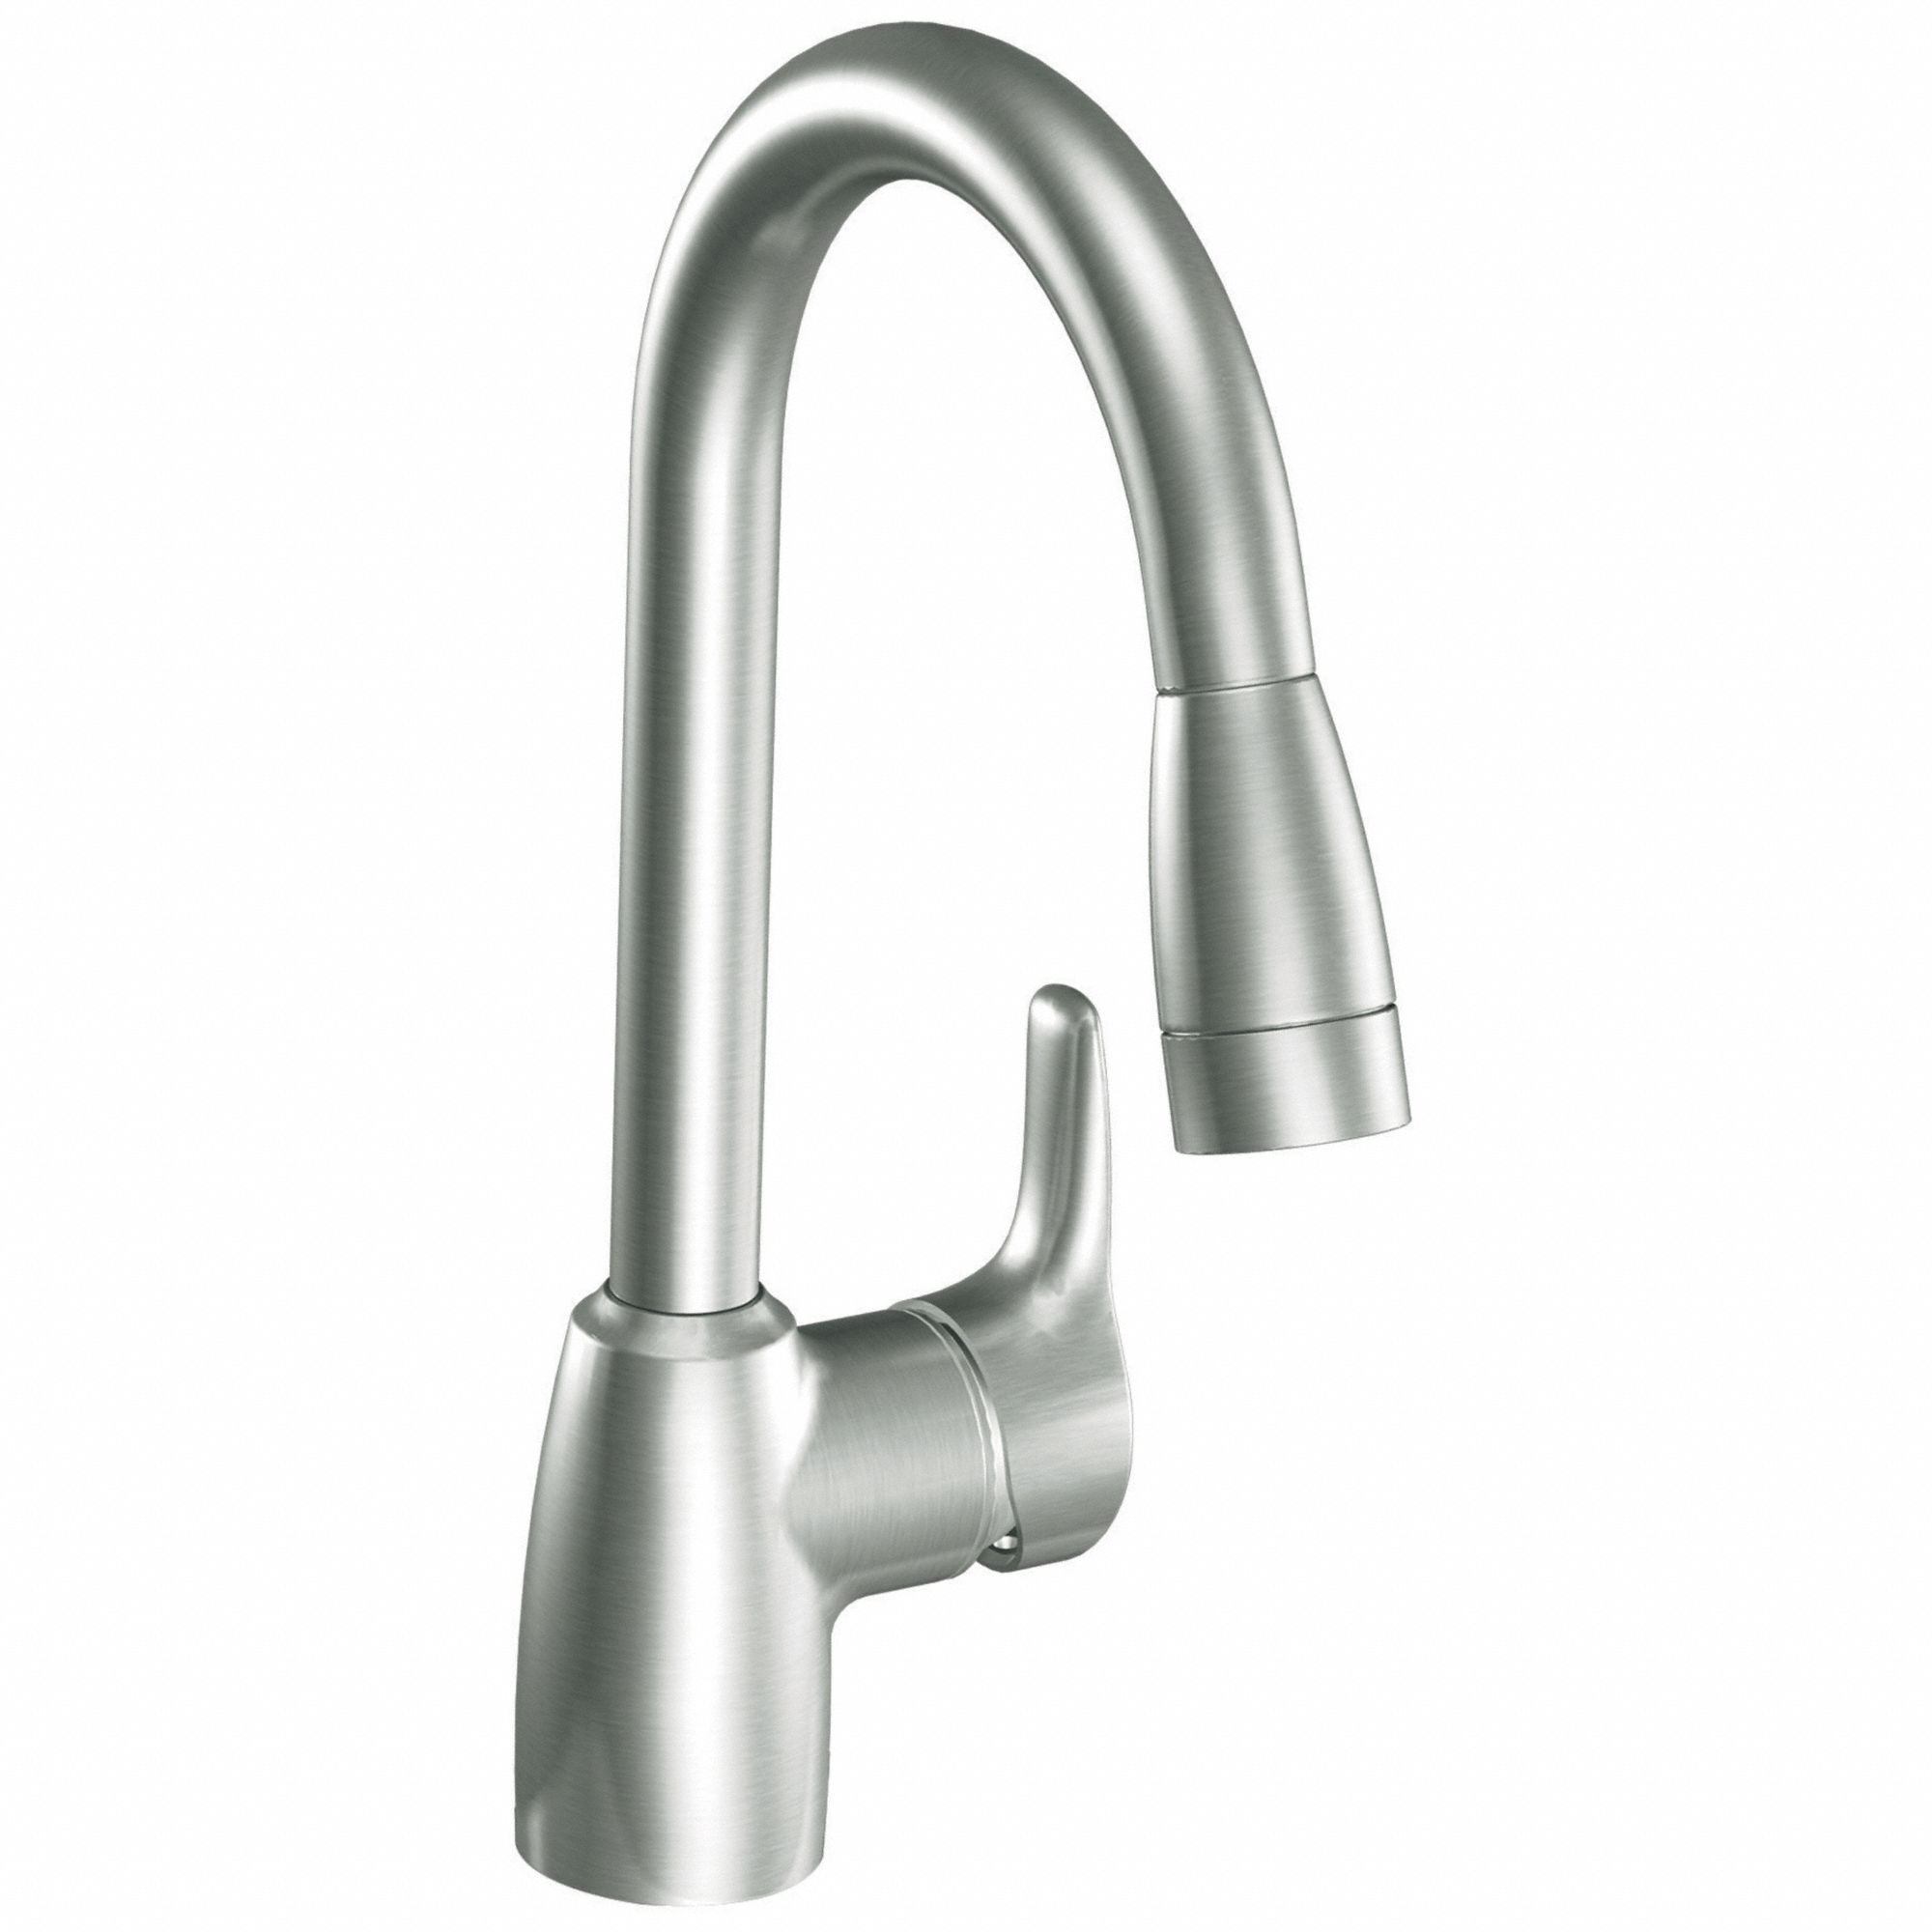 Kitchen Faucet: Baystone™, CA42519, Stainless Steel Finish, 1.5 gpm Flow Rate